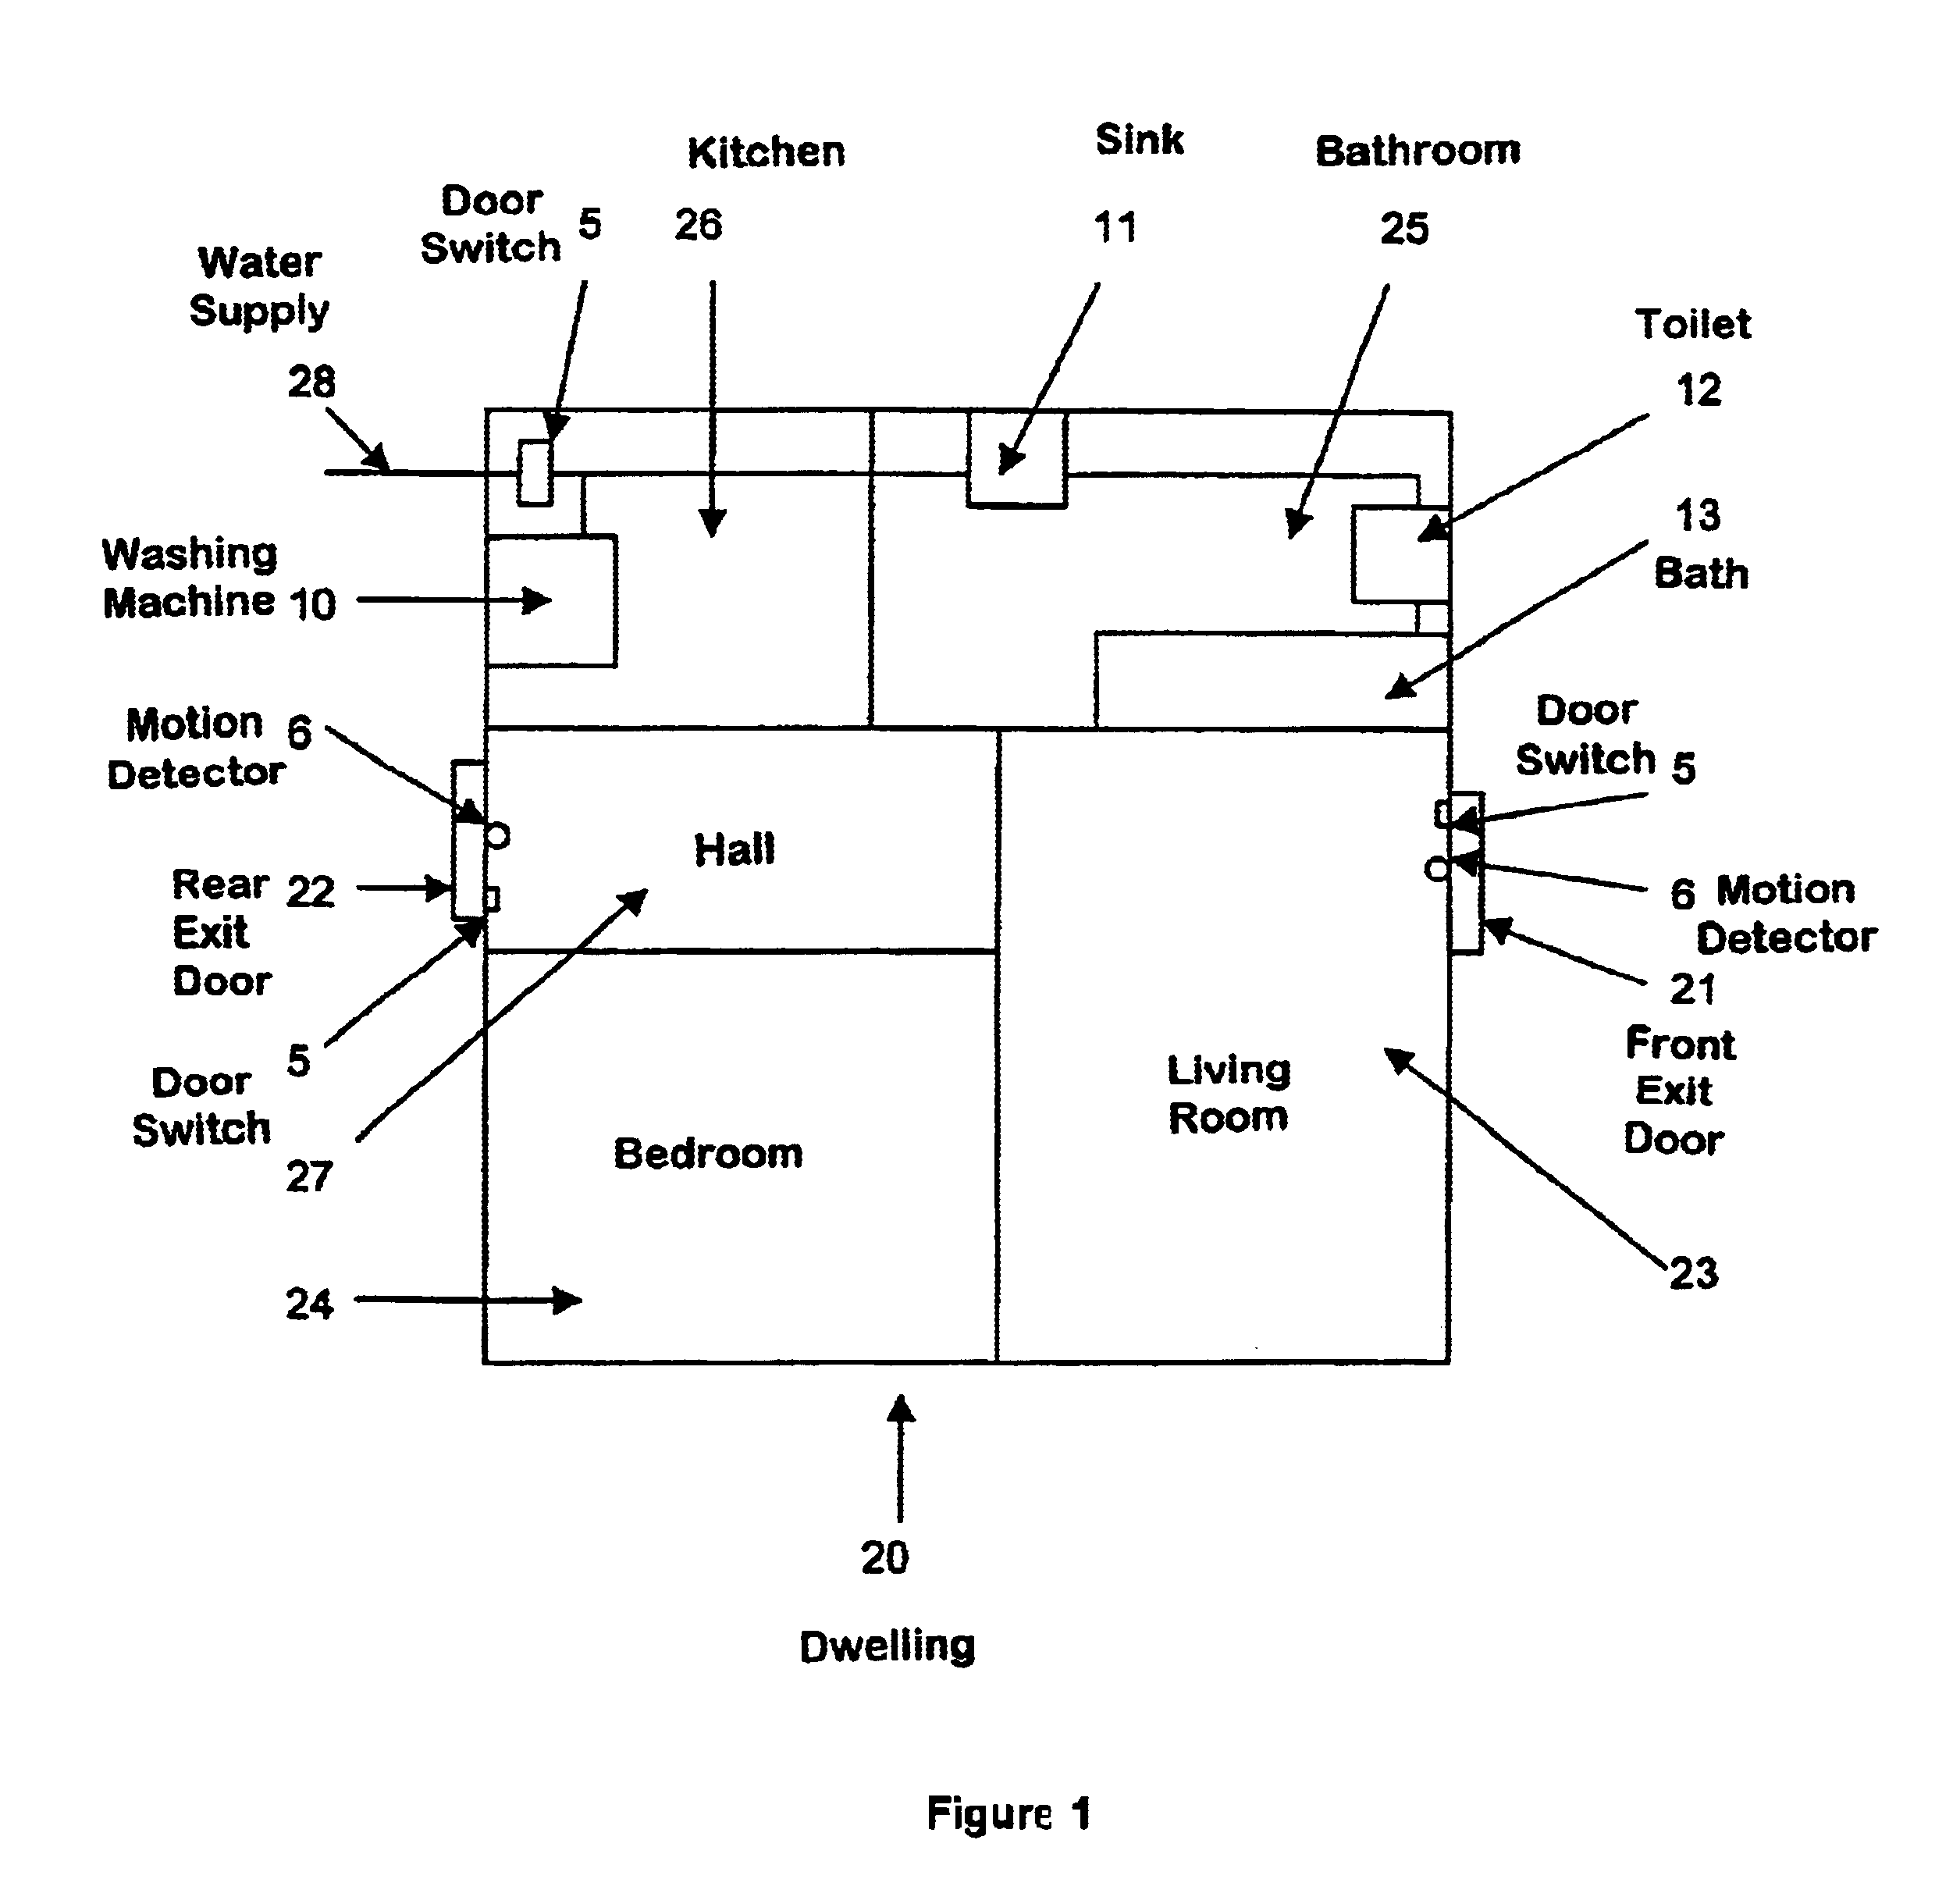 System for monitoring an inhabited environment